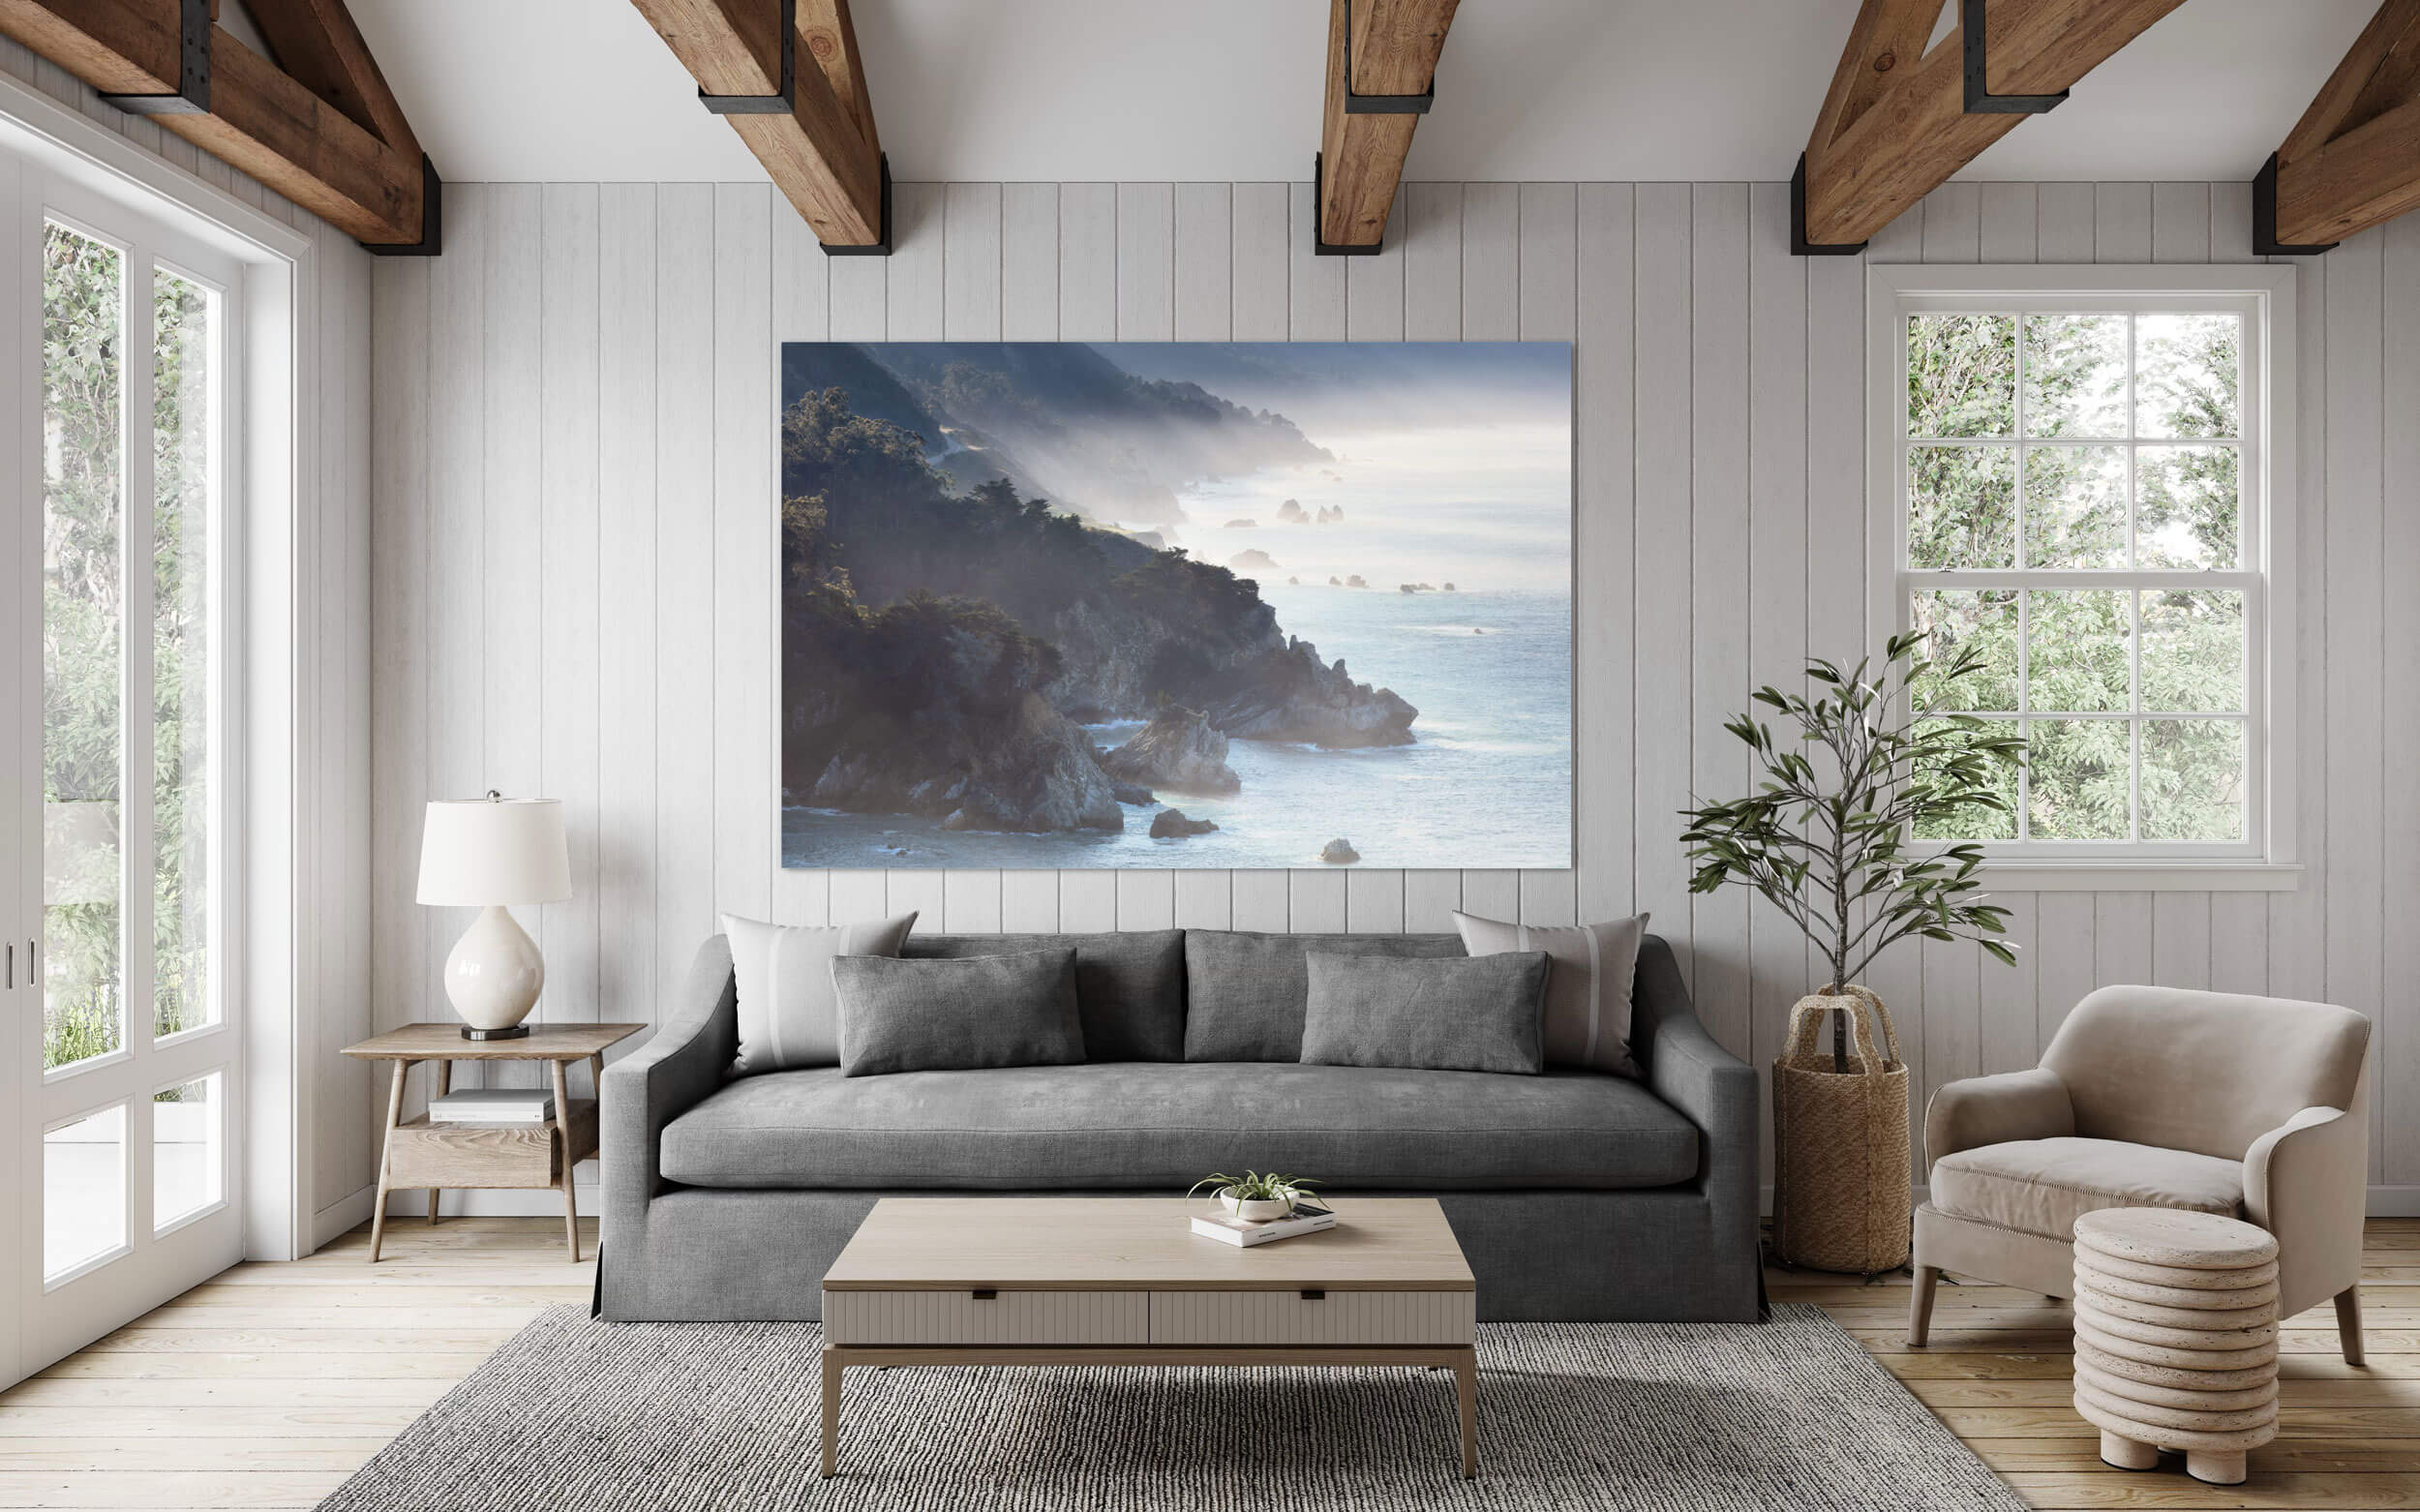 A Big Sur picture from California hangs in a living room.